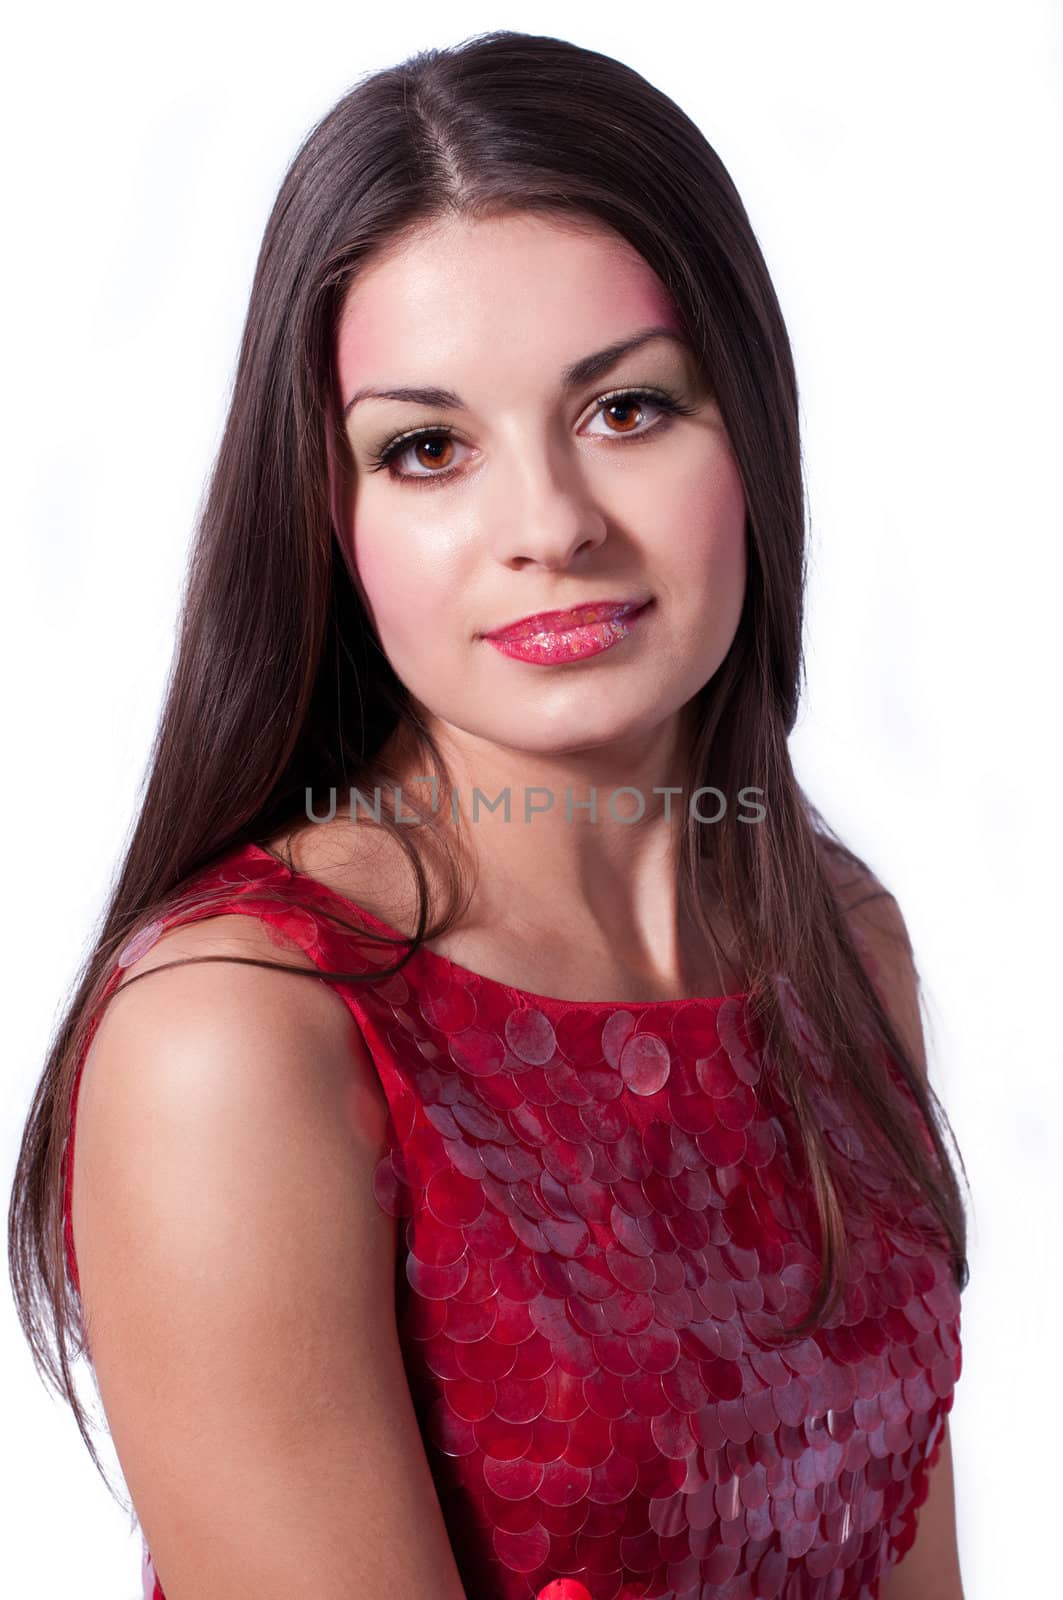 Portrait of a fresh and lovely woman wearing the red blouse